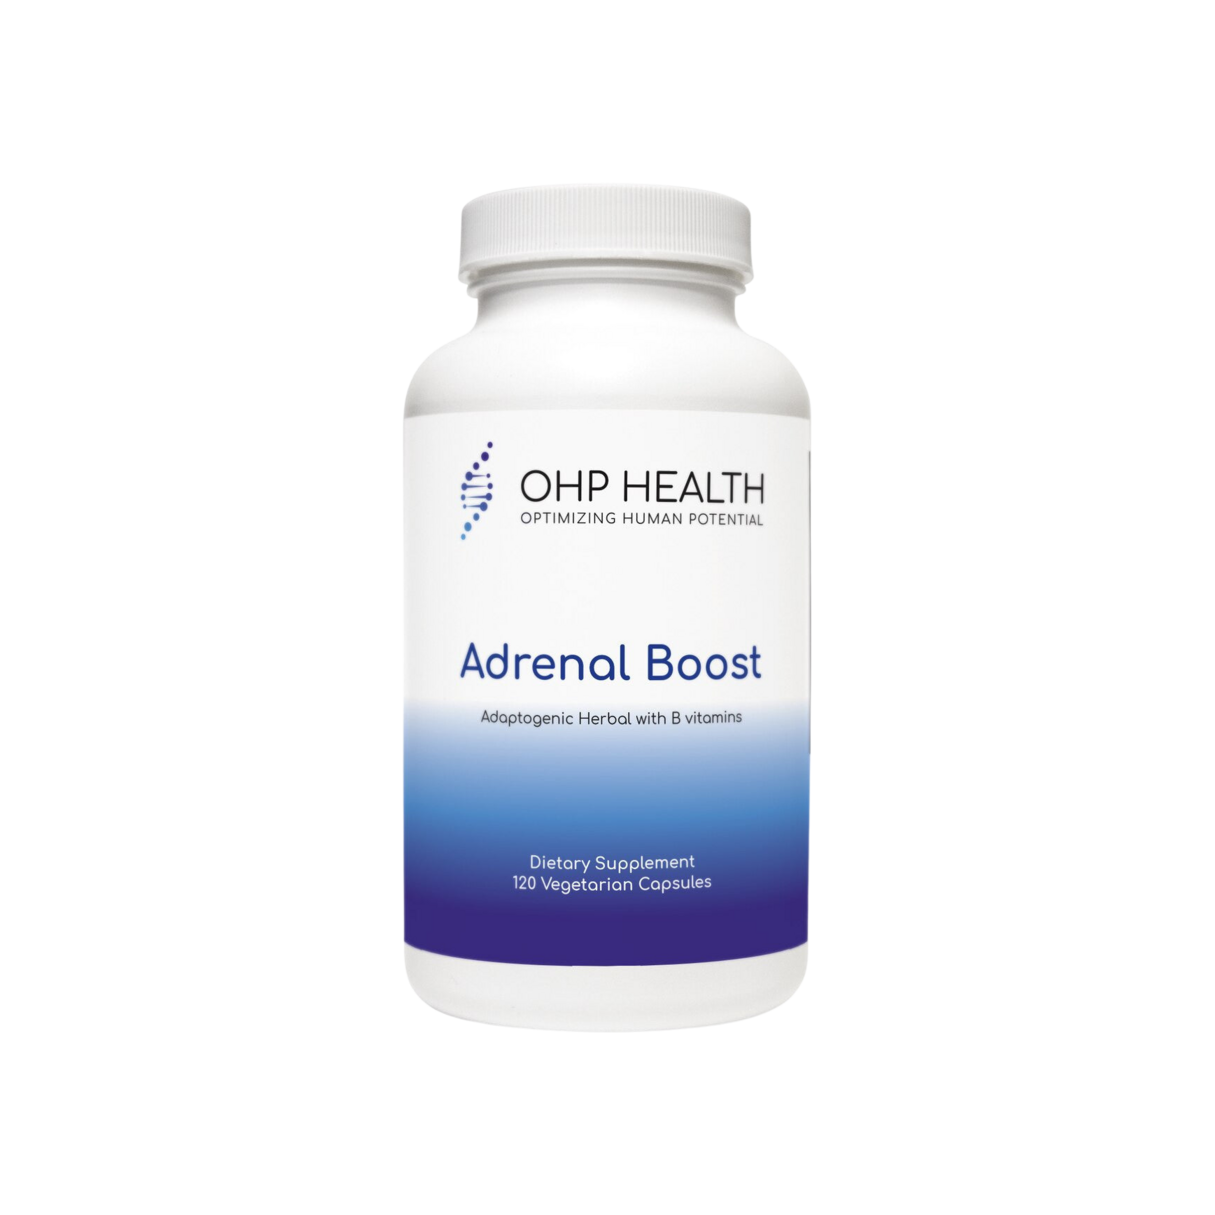 A bottle of Adrenal Boost | 120 count from OHP Health.